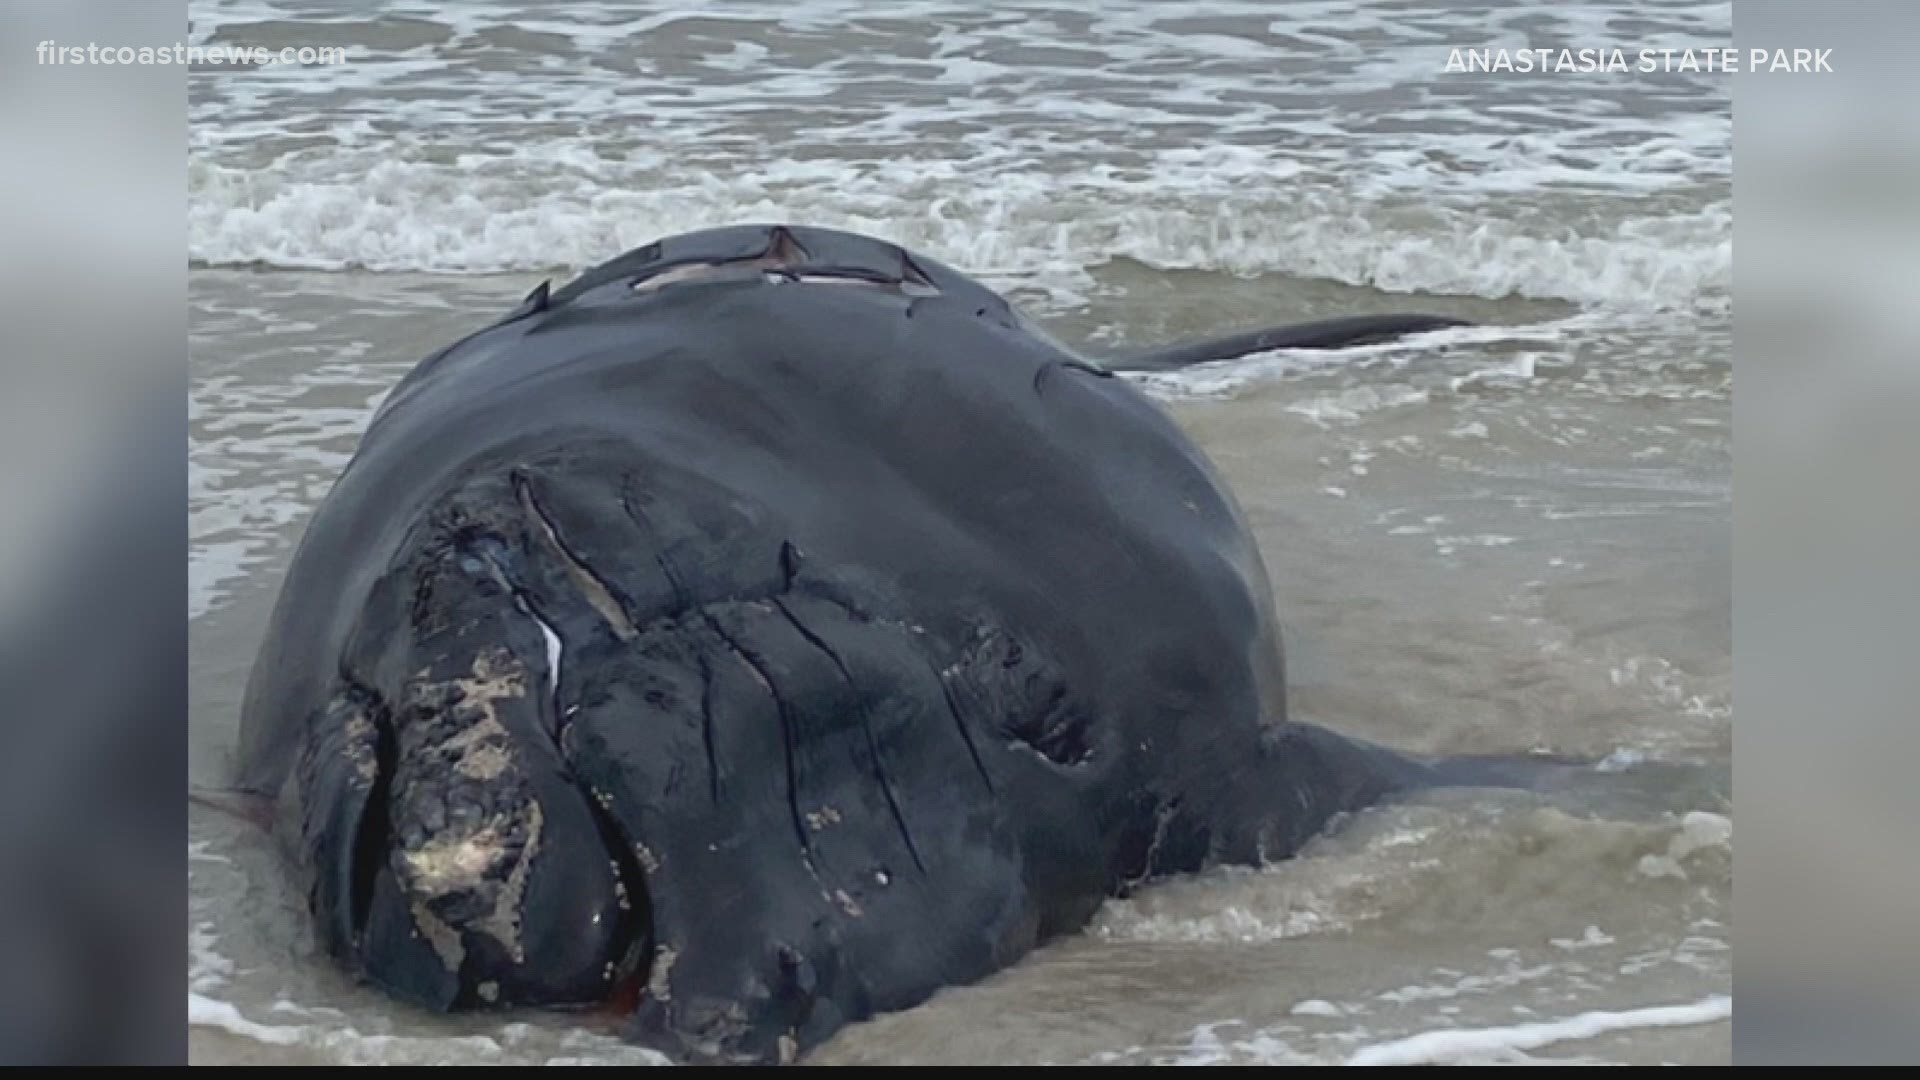 Endangered baby right whale killed after colliding with boat near St. Augustine Inlet